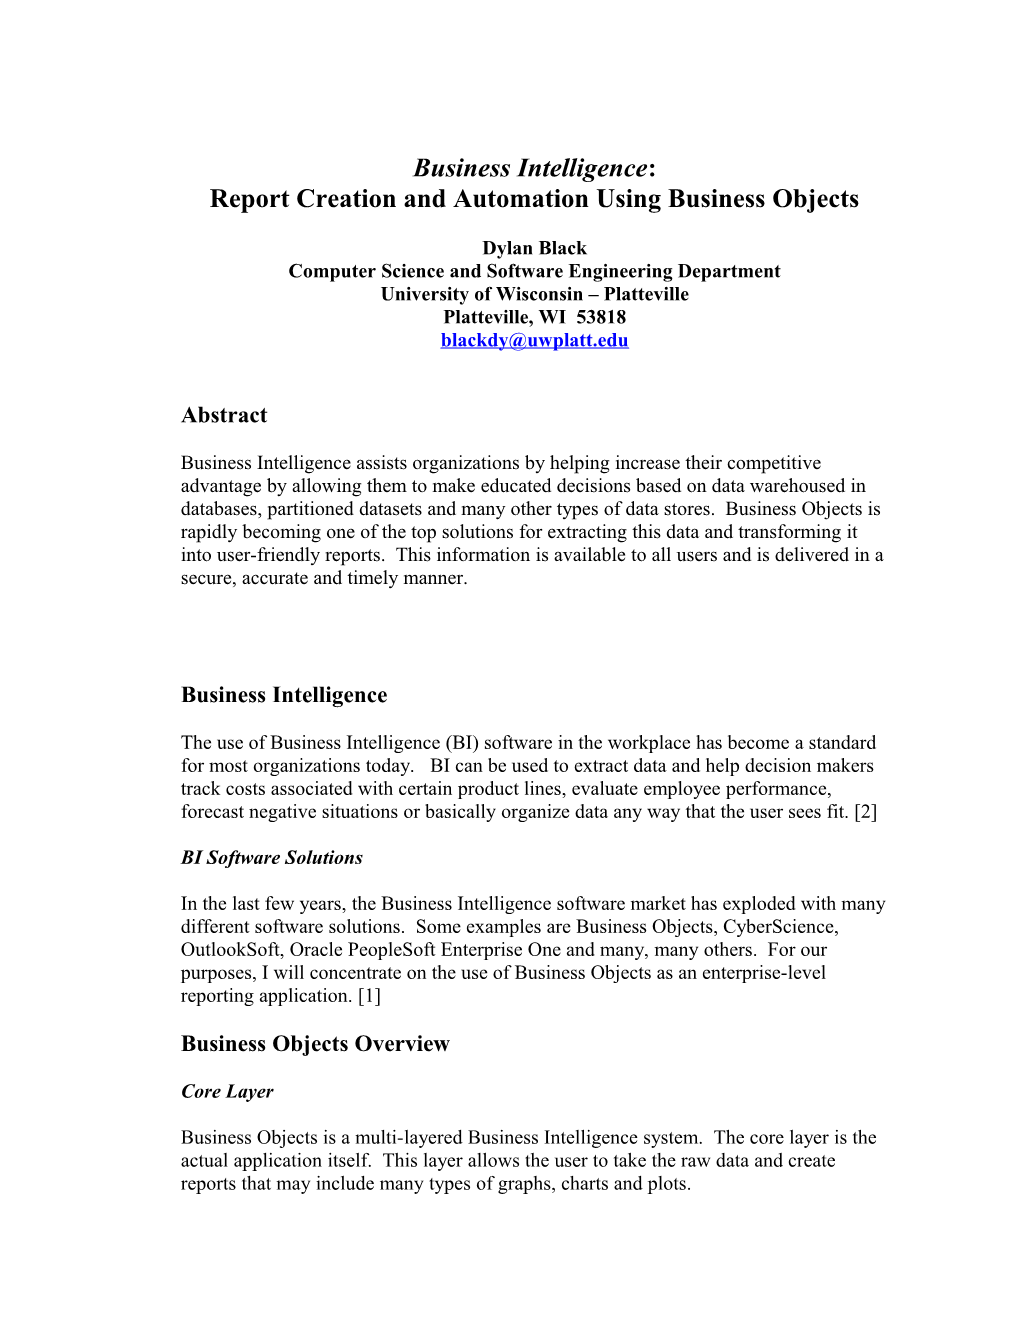 Report Creation and Automation Using Business Objects